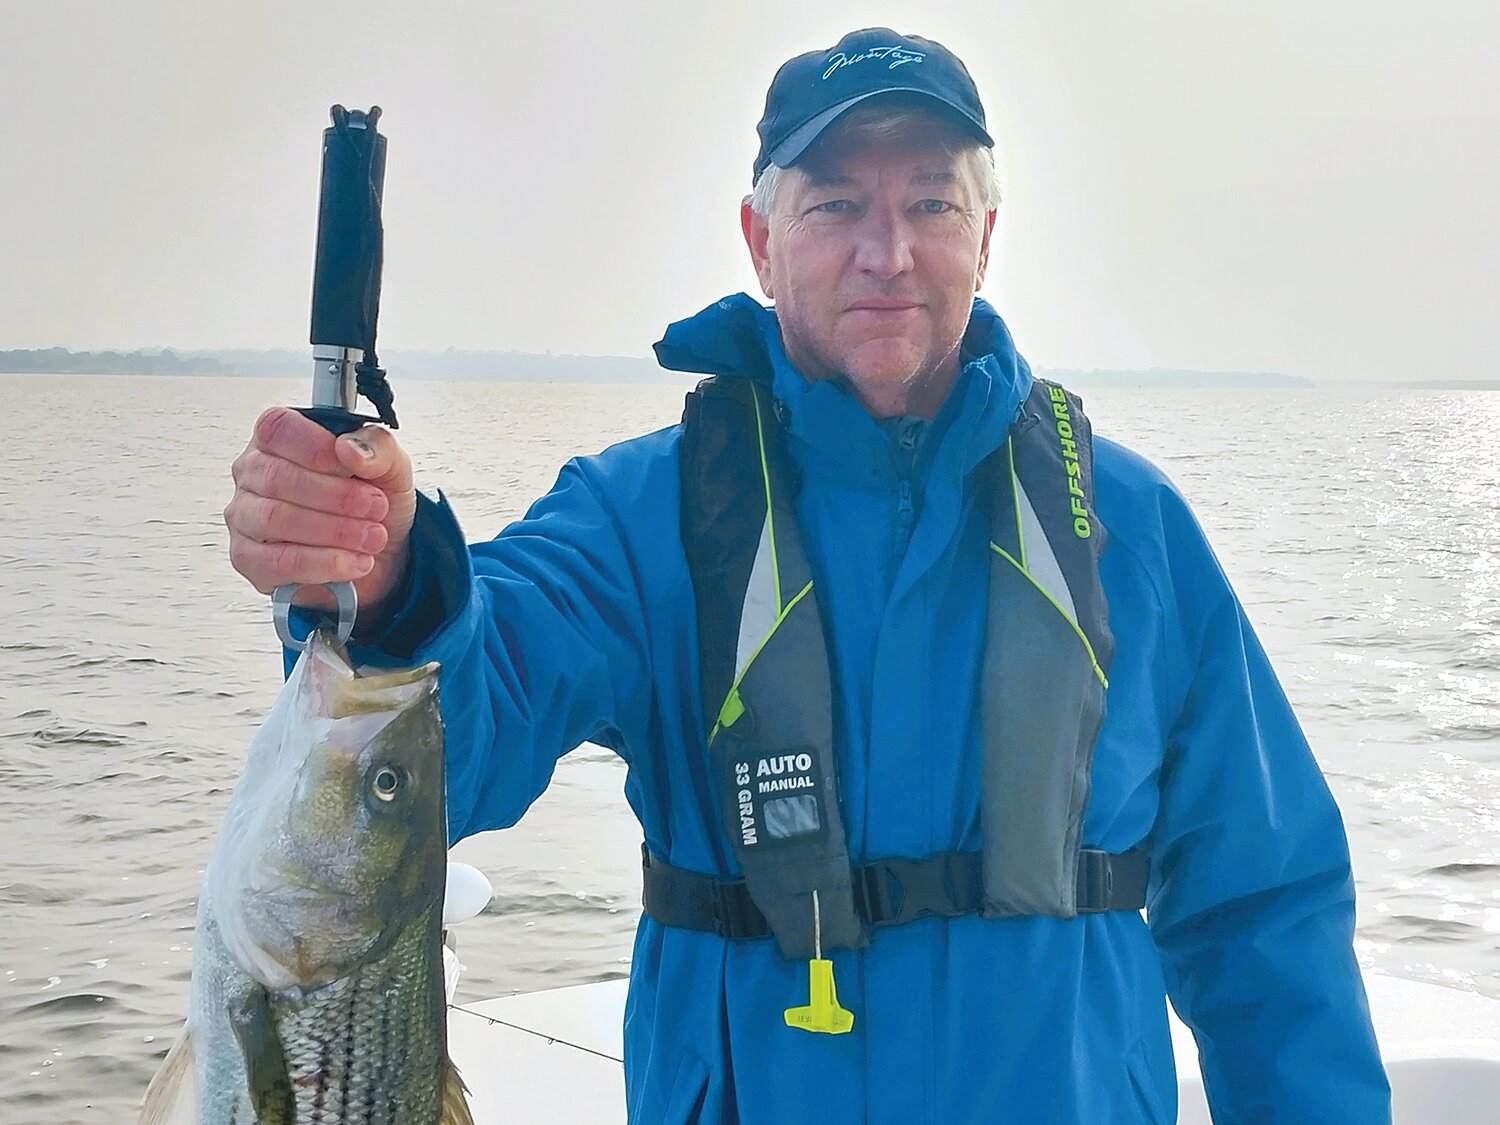 Angler Dave Hanuschak caught multiple striped bass to 29” that were feeding Sunday on the surface in Greenwich Bay.